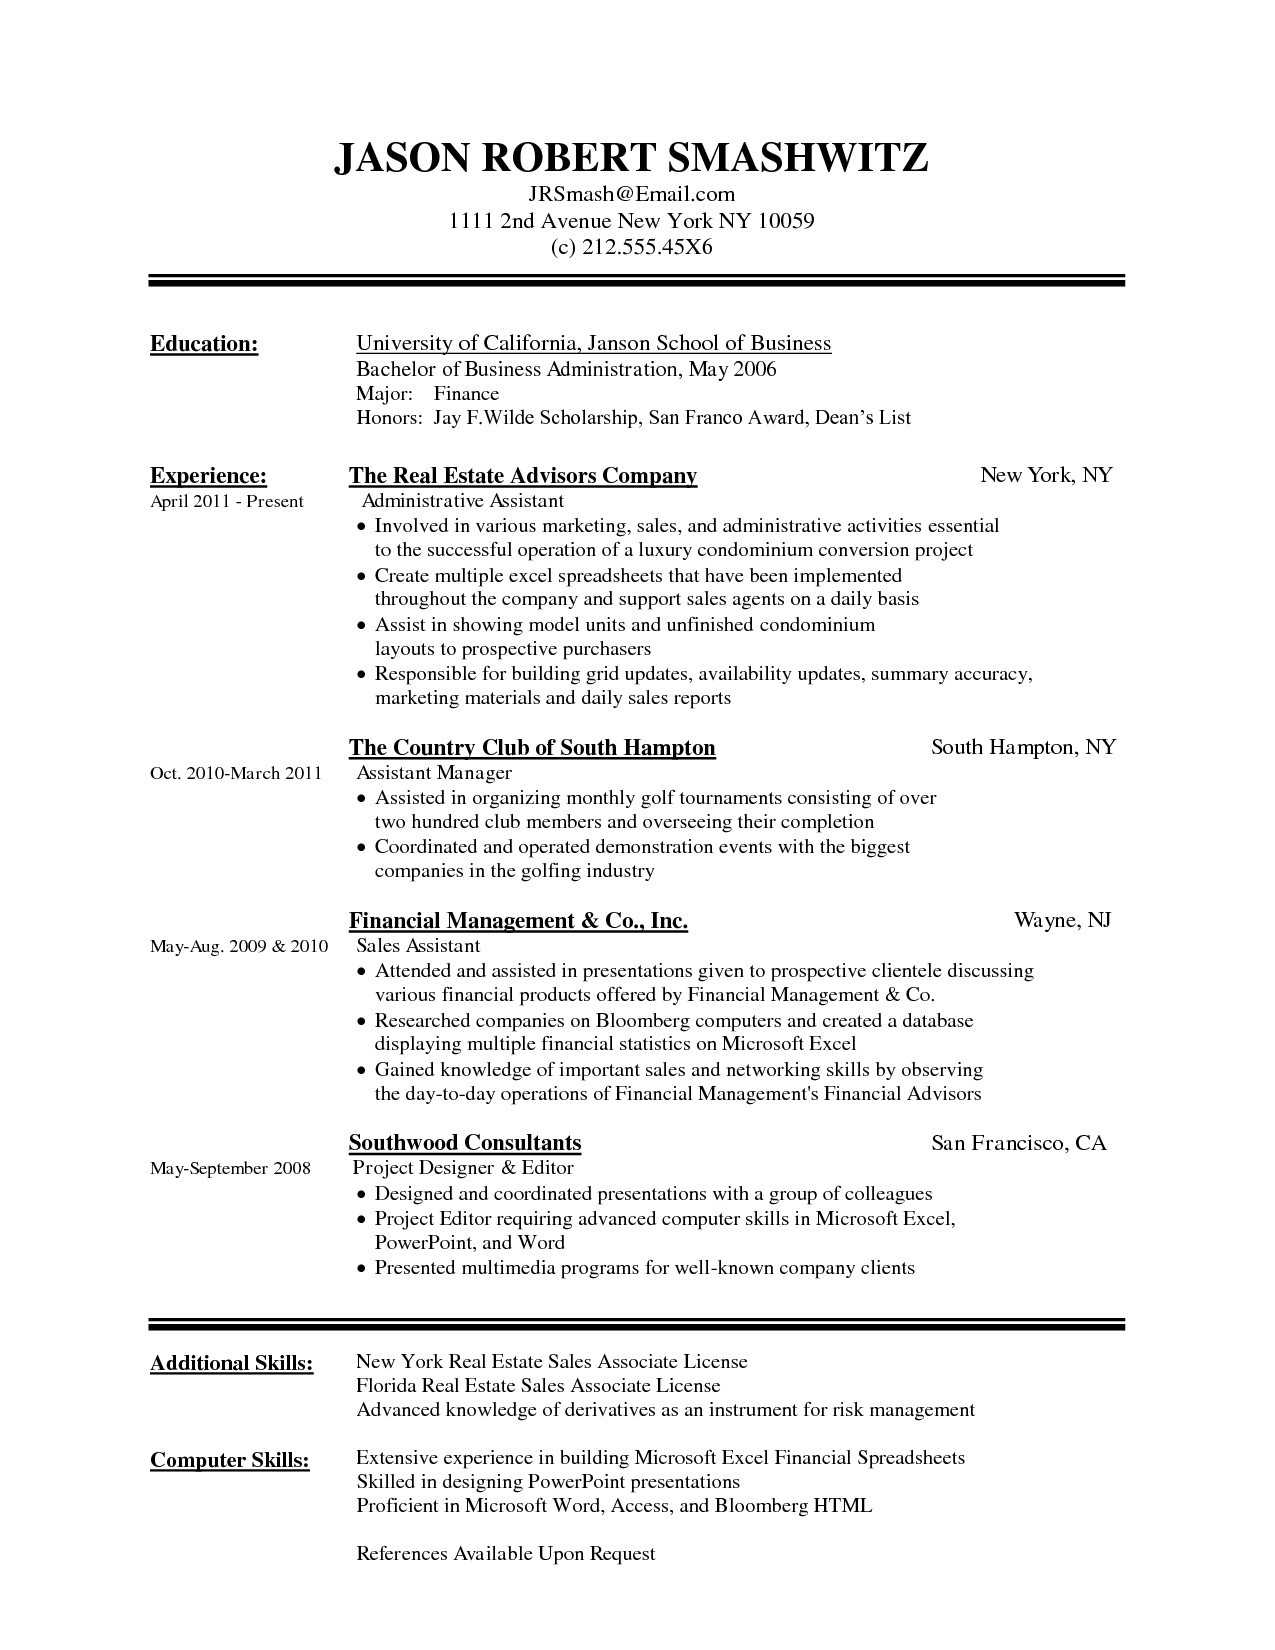 Awesome Resume Templates For Word 2010 – Superkepo For Resume Templates Word 2010